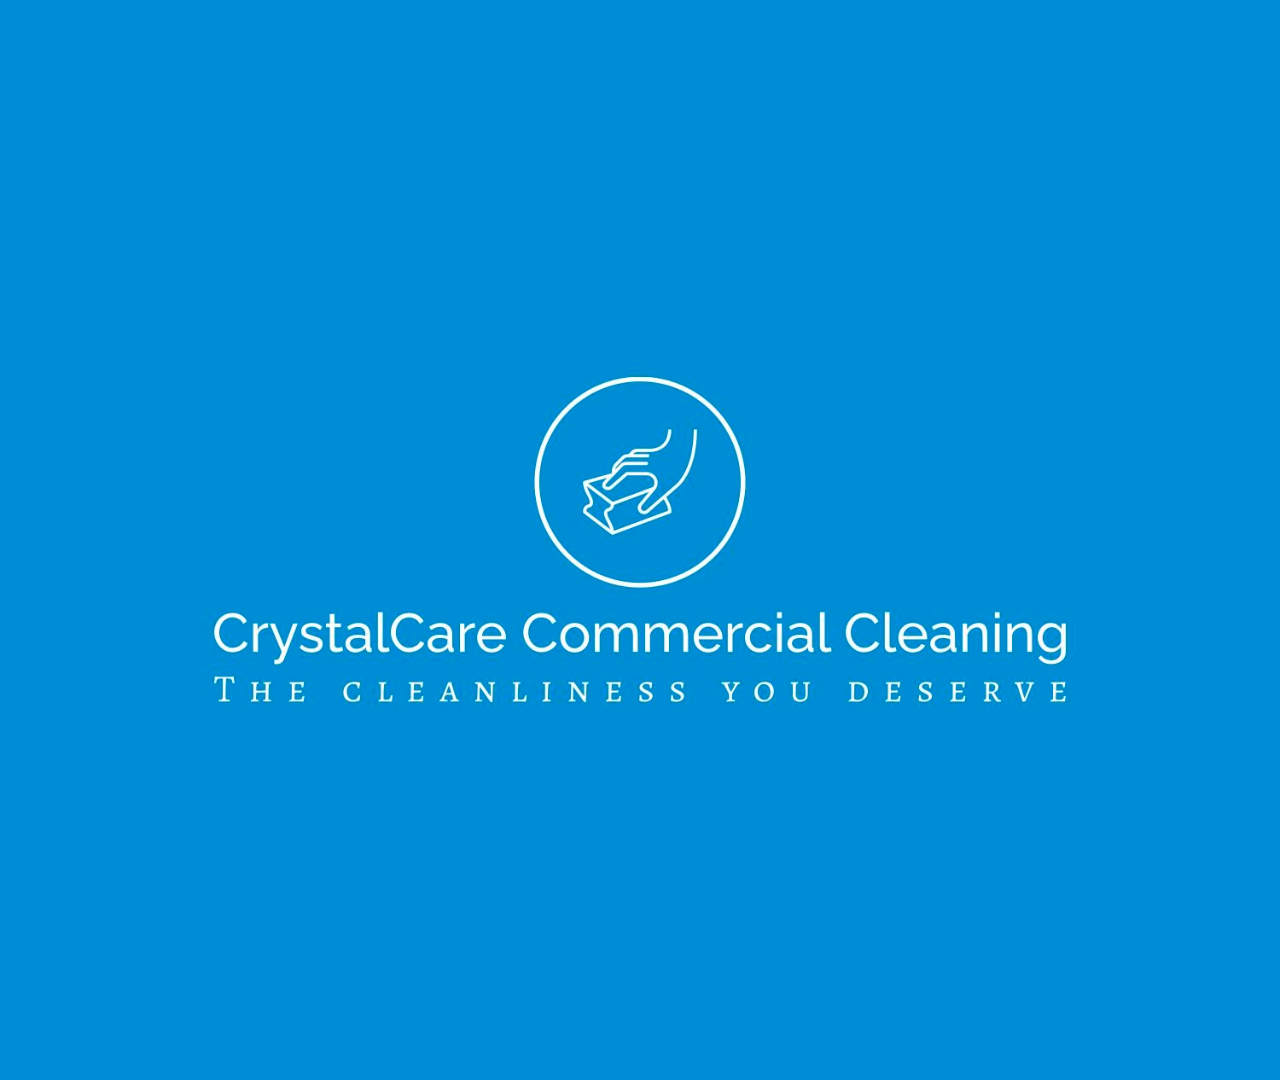 CrystalCare Commercial Cleaning - New Jersey Commercial